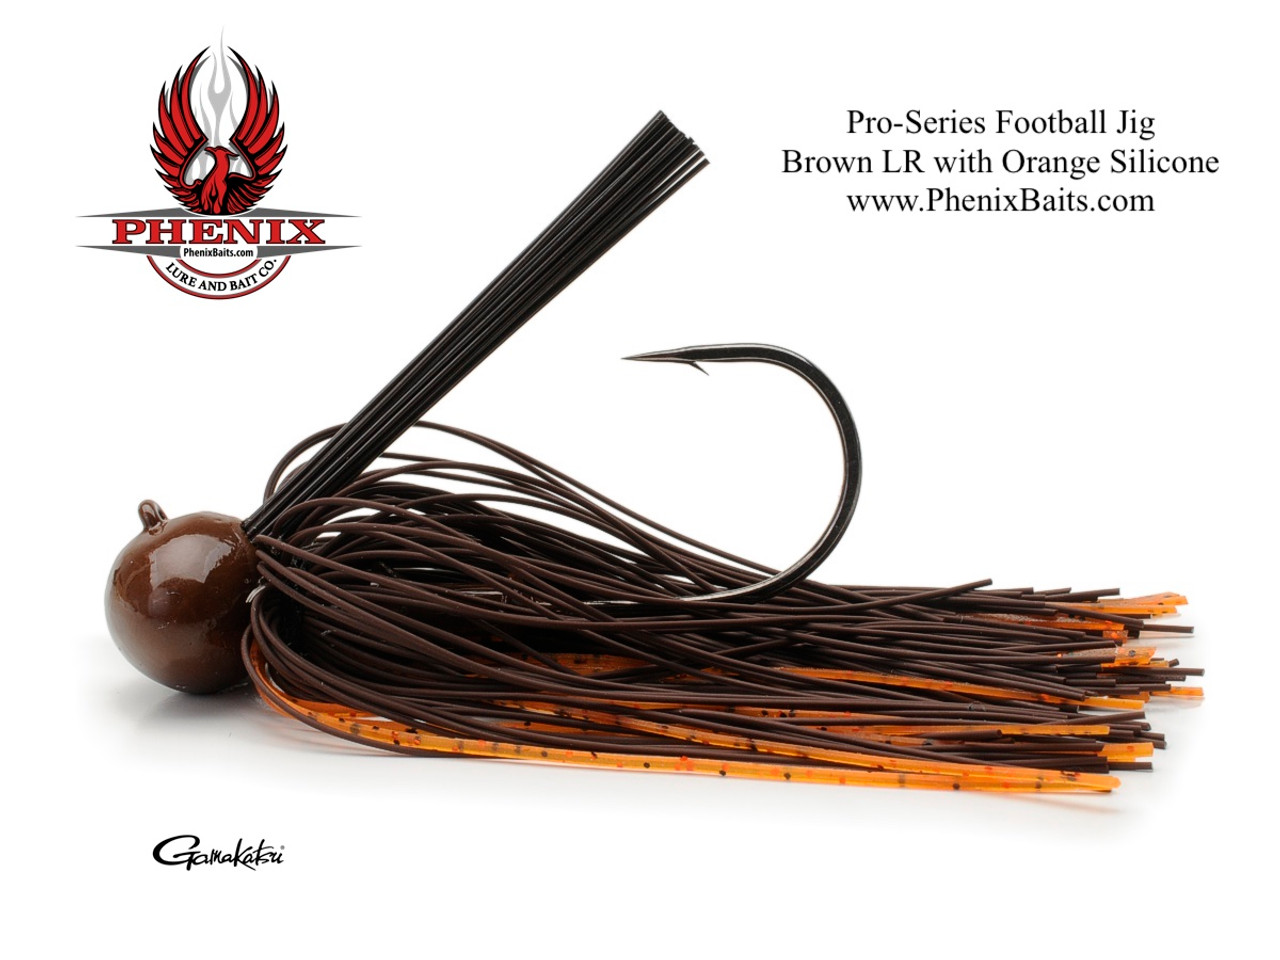 Phenix Pro-Series Football Jig - Brown Living Rubber with Orange Silicone